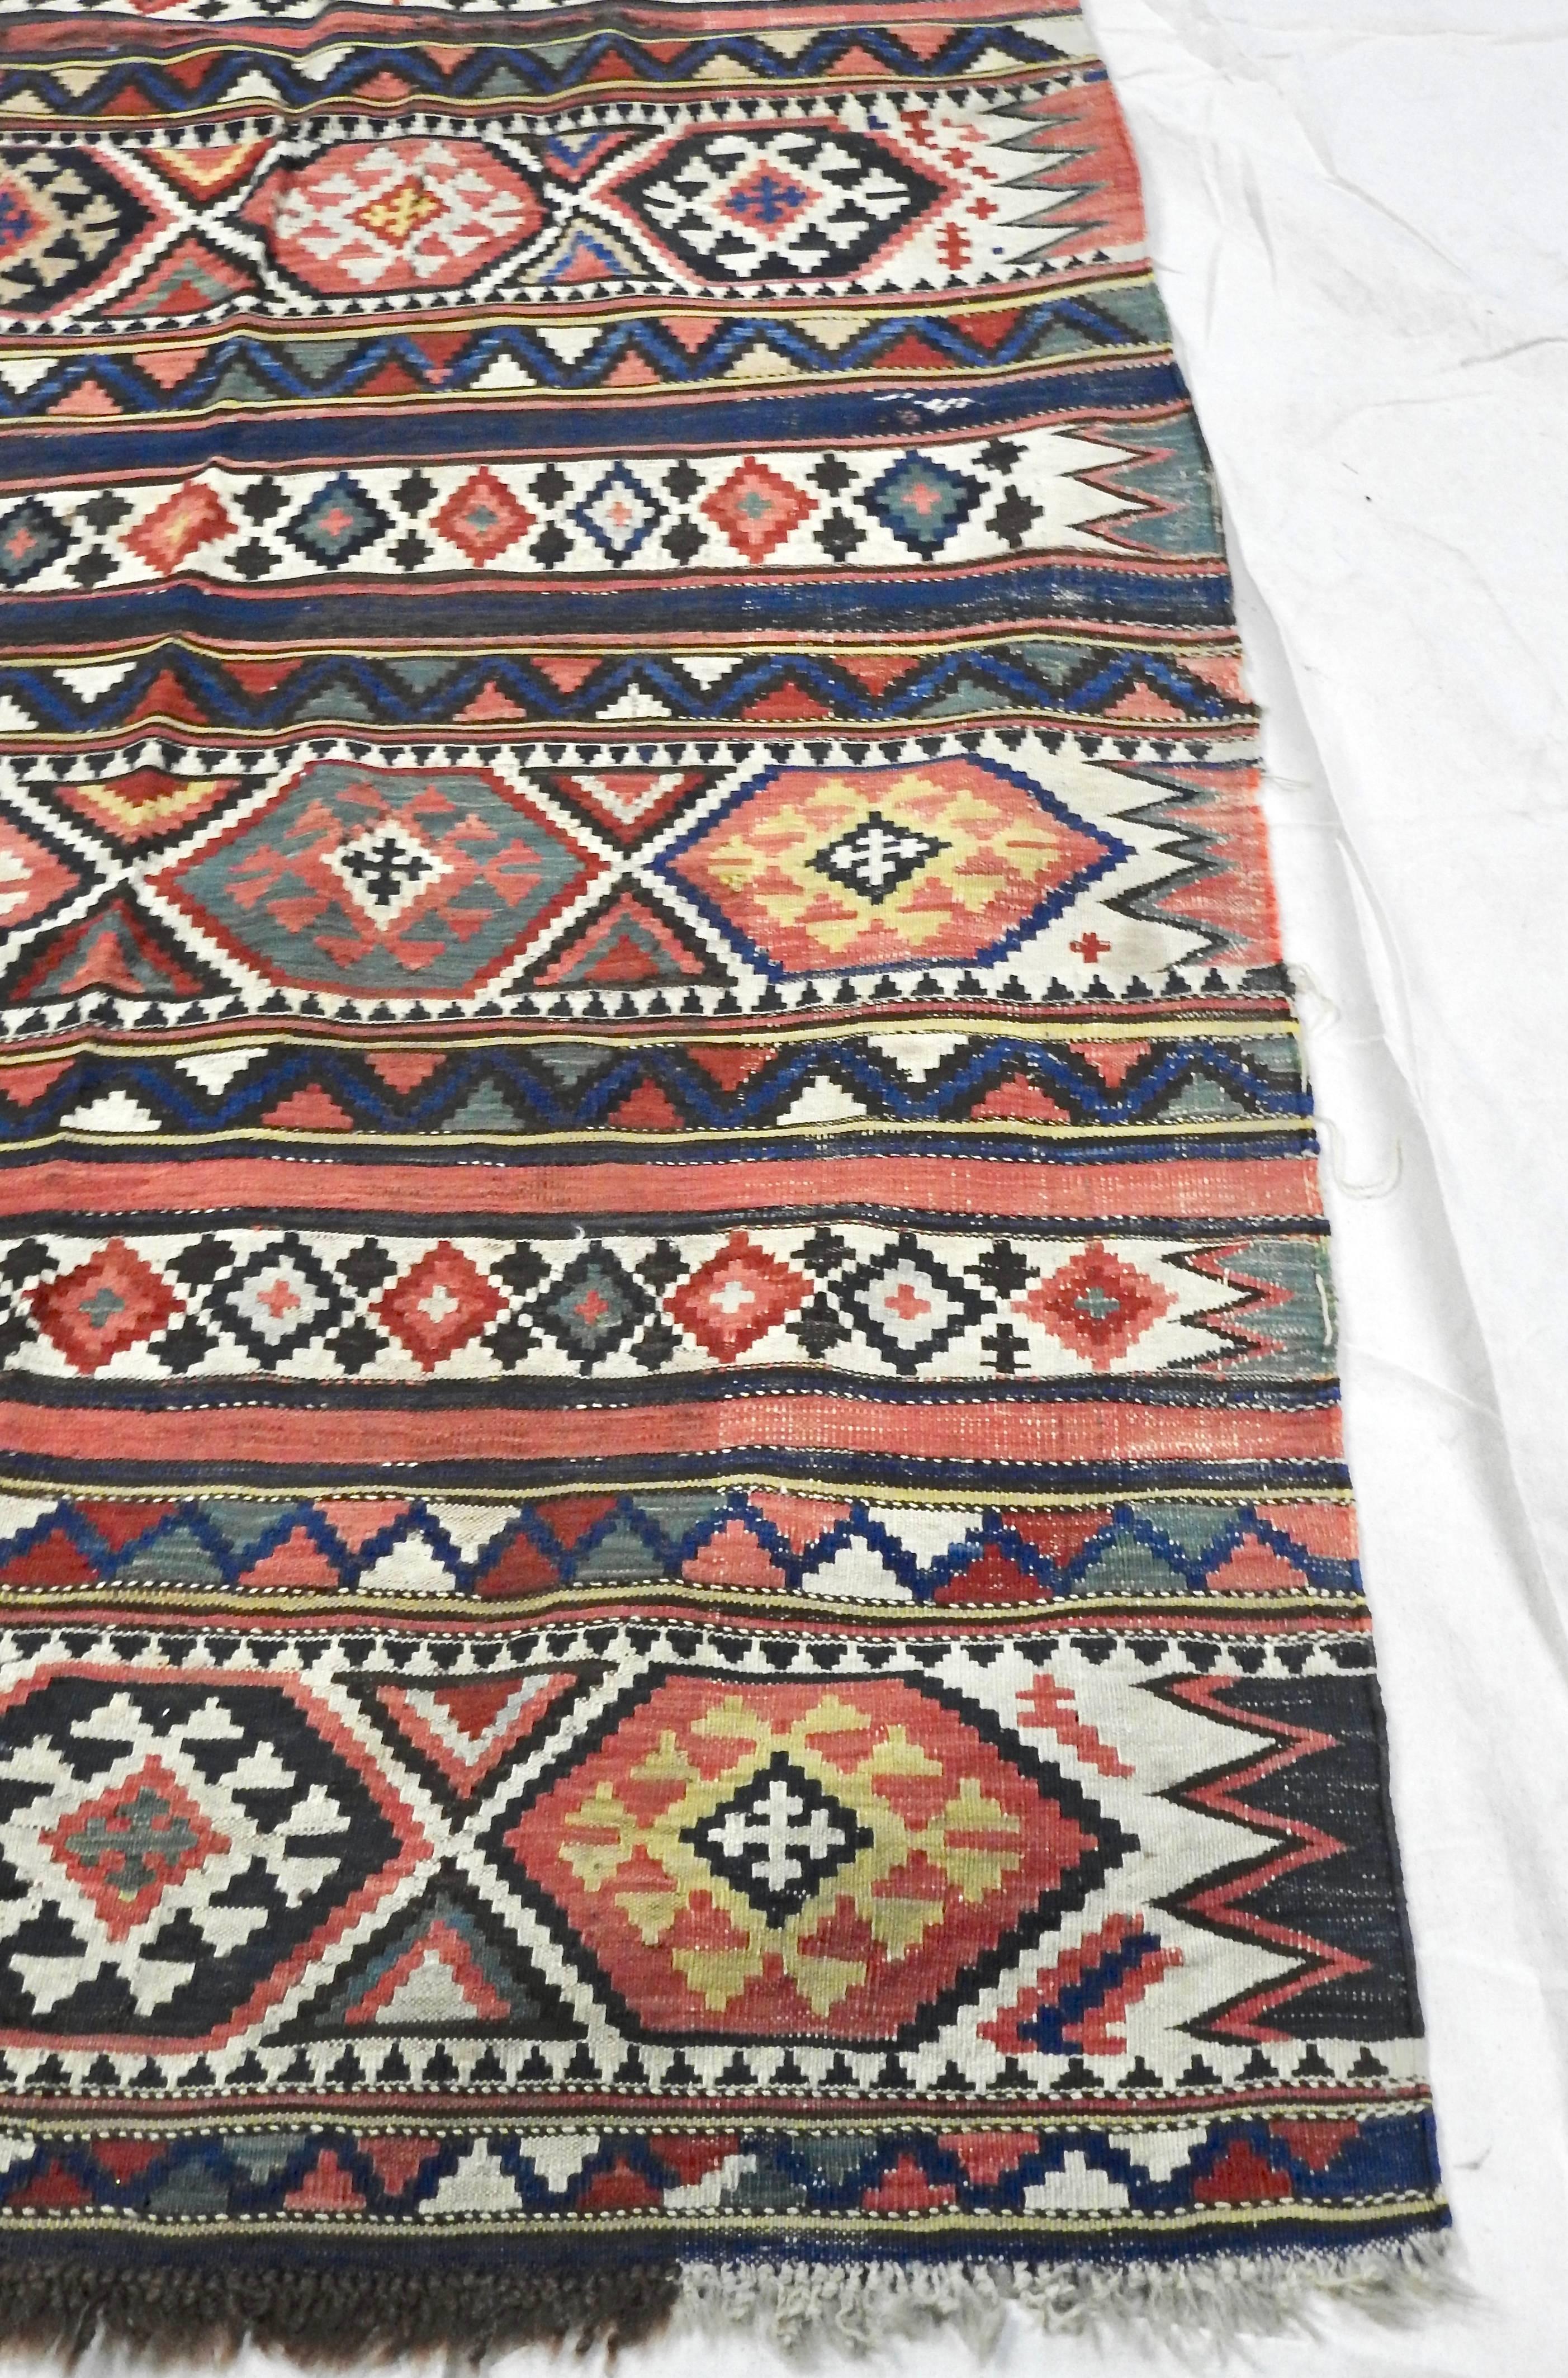 This is a lovely handwoven Turkish Kilim carpet runner. This rug features stripes of horizontal panels of scorpion, running water, and eye motifs in a palette of dark blues, greens, reds, pinks, yellows, and browns. It has a hand-tied, natural,